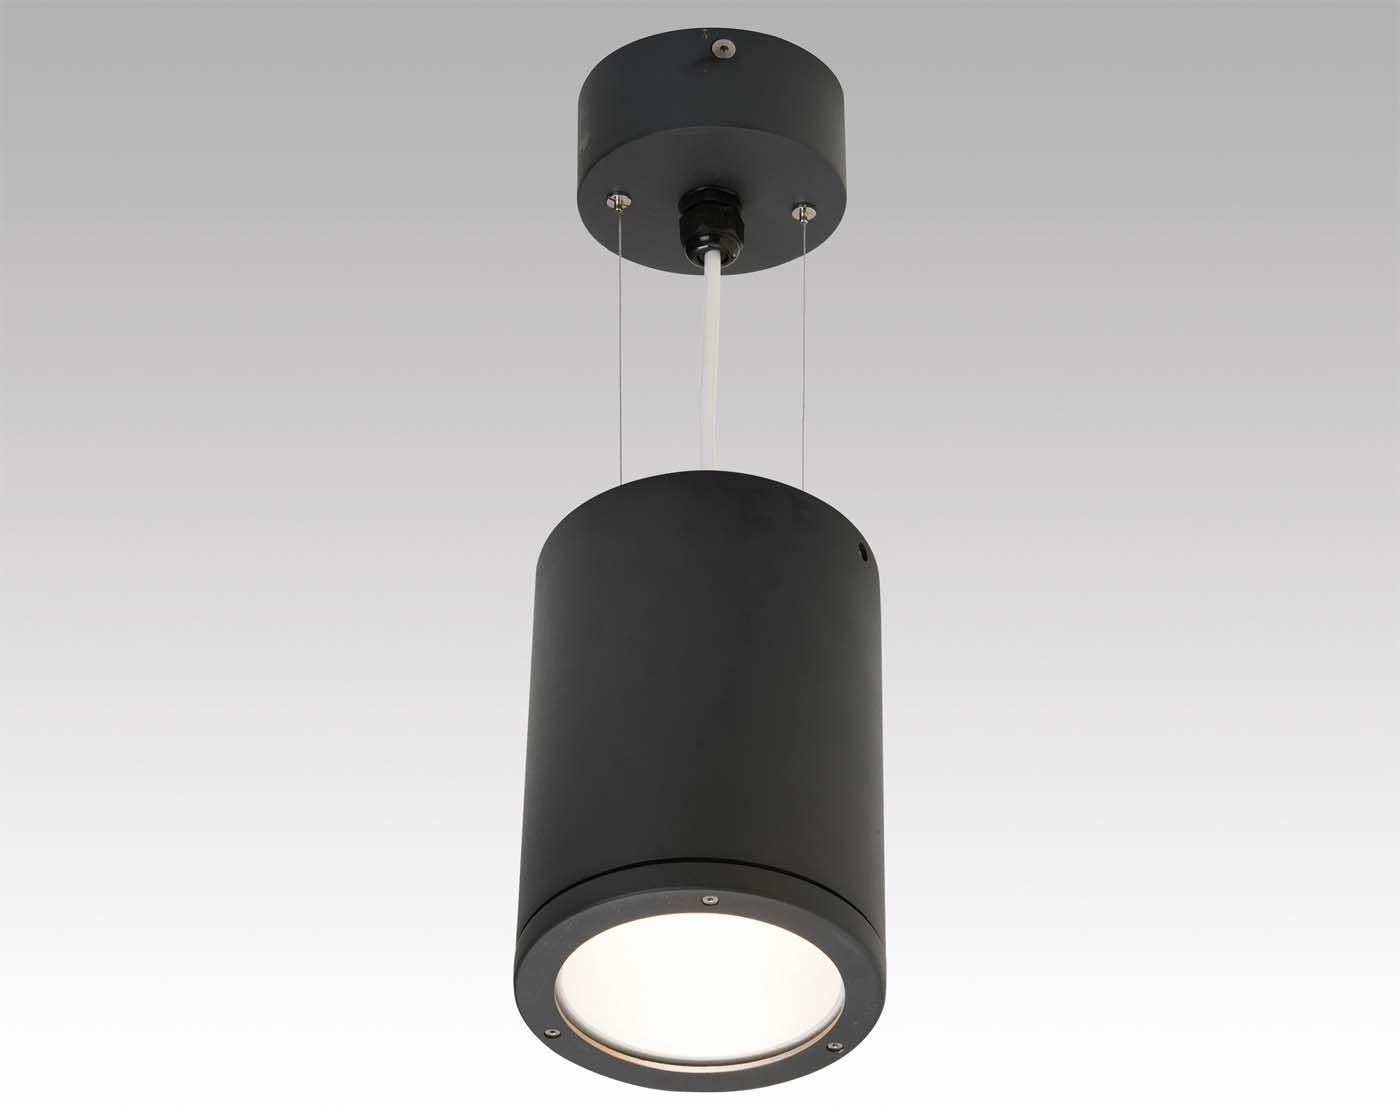 Timbal P in the group Categories / Pendant at Nokalux (721519r)